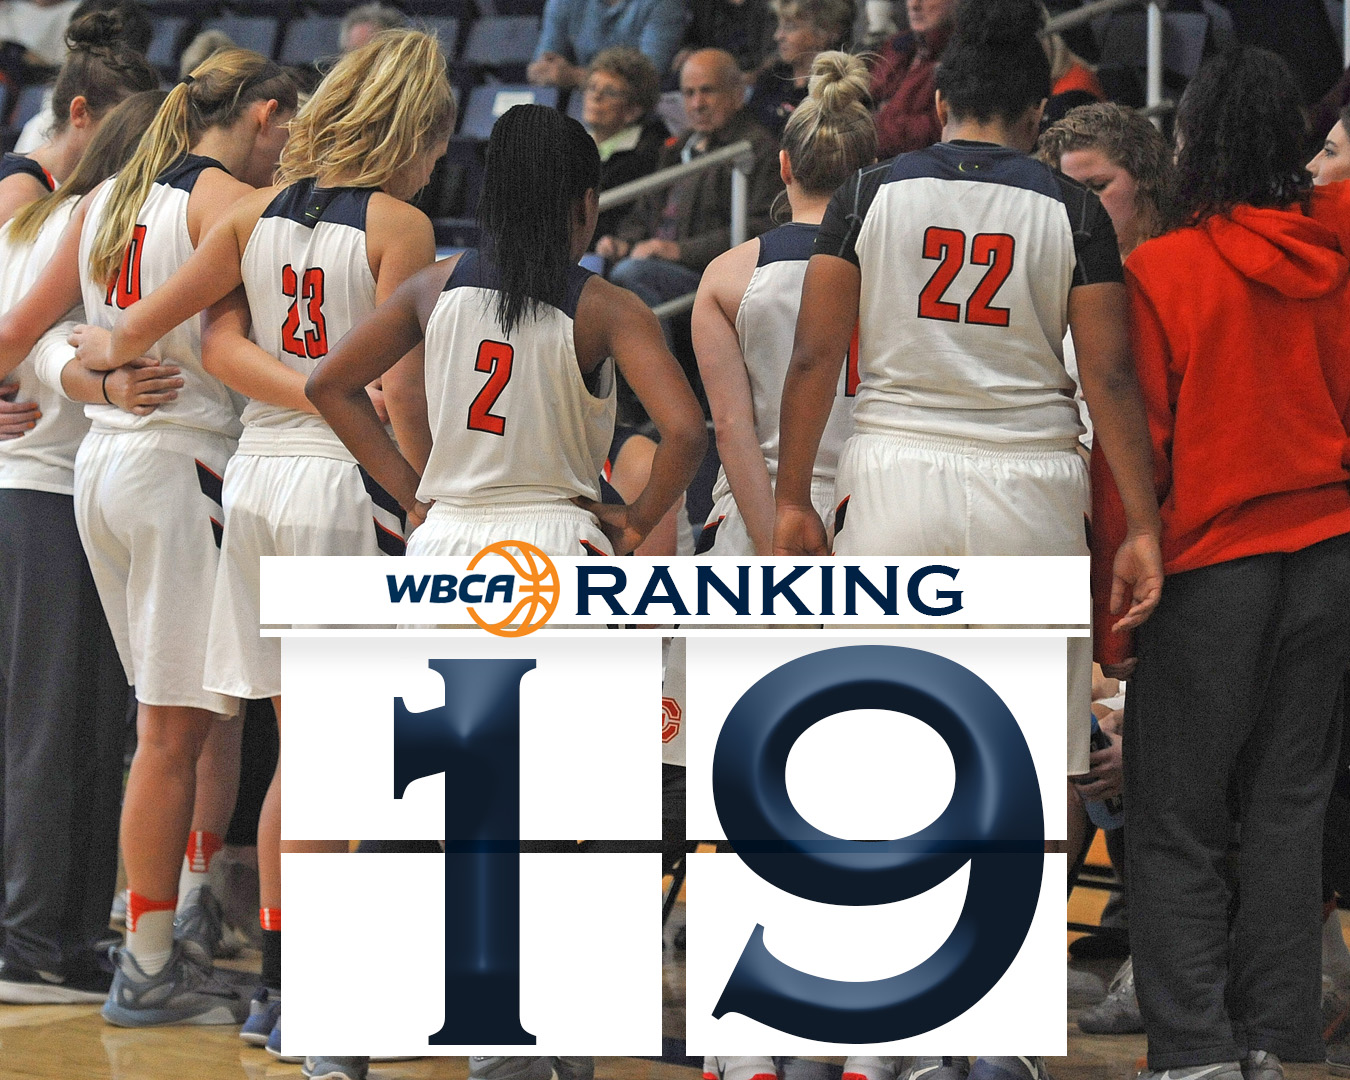 Lady Eagles ranked #19 in WBCA poll